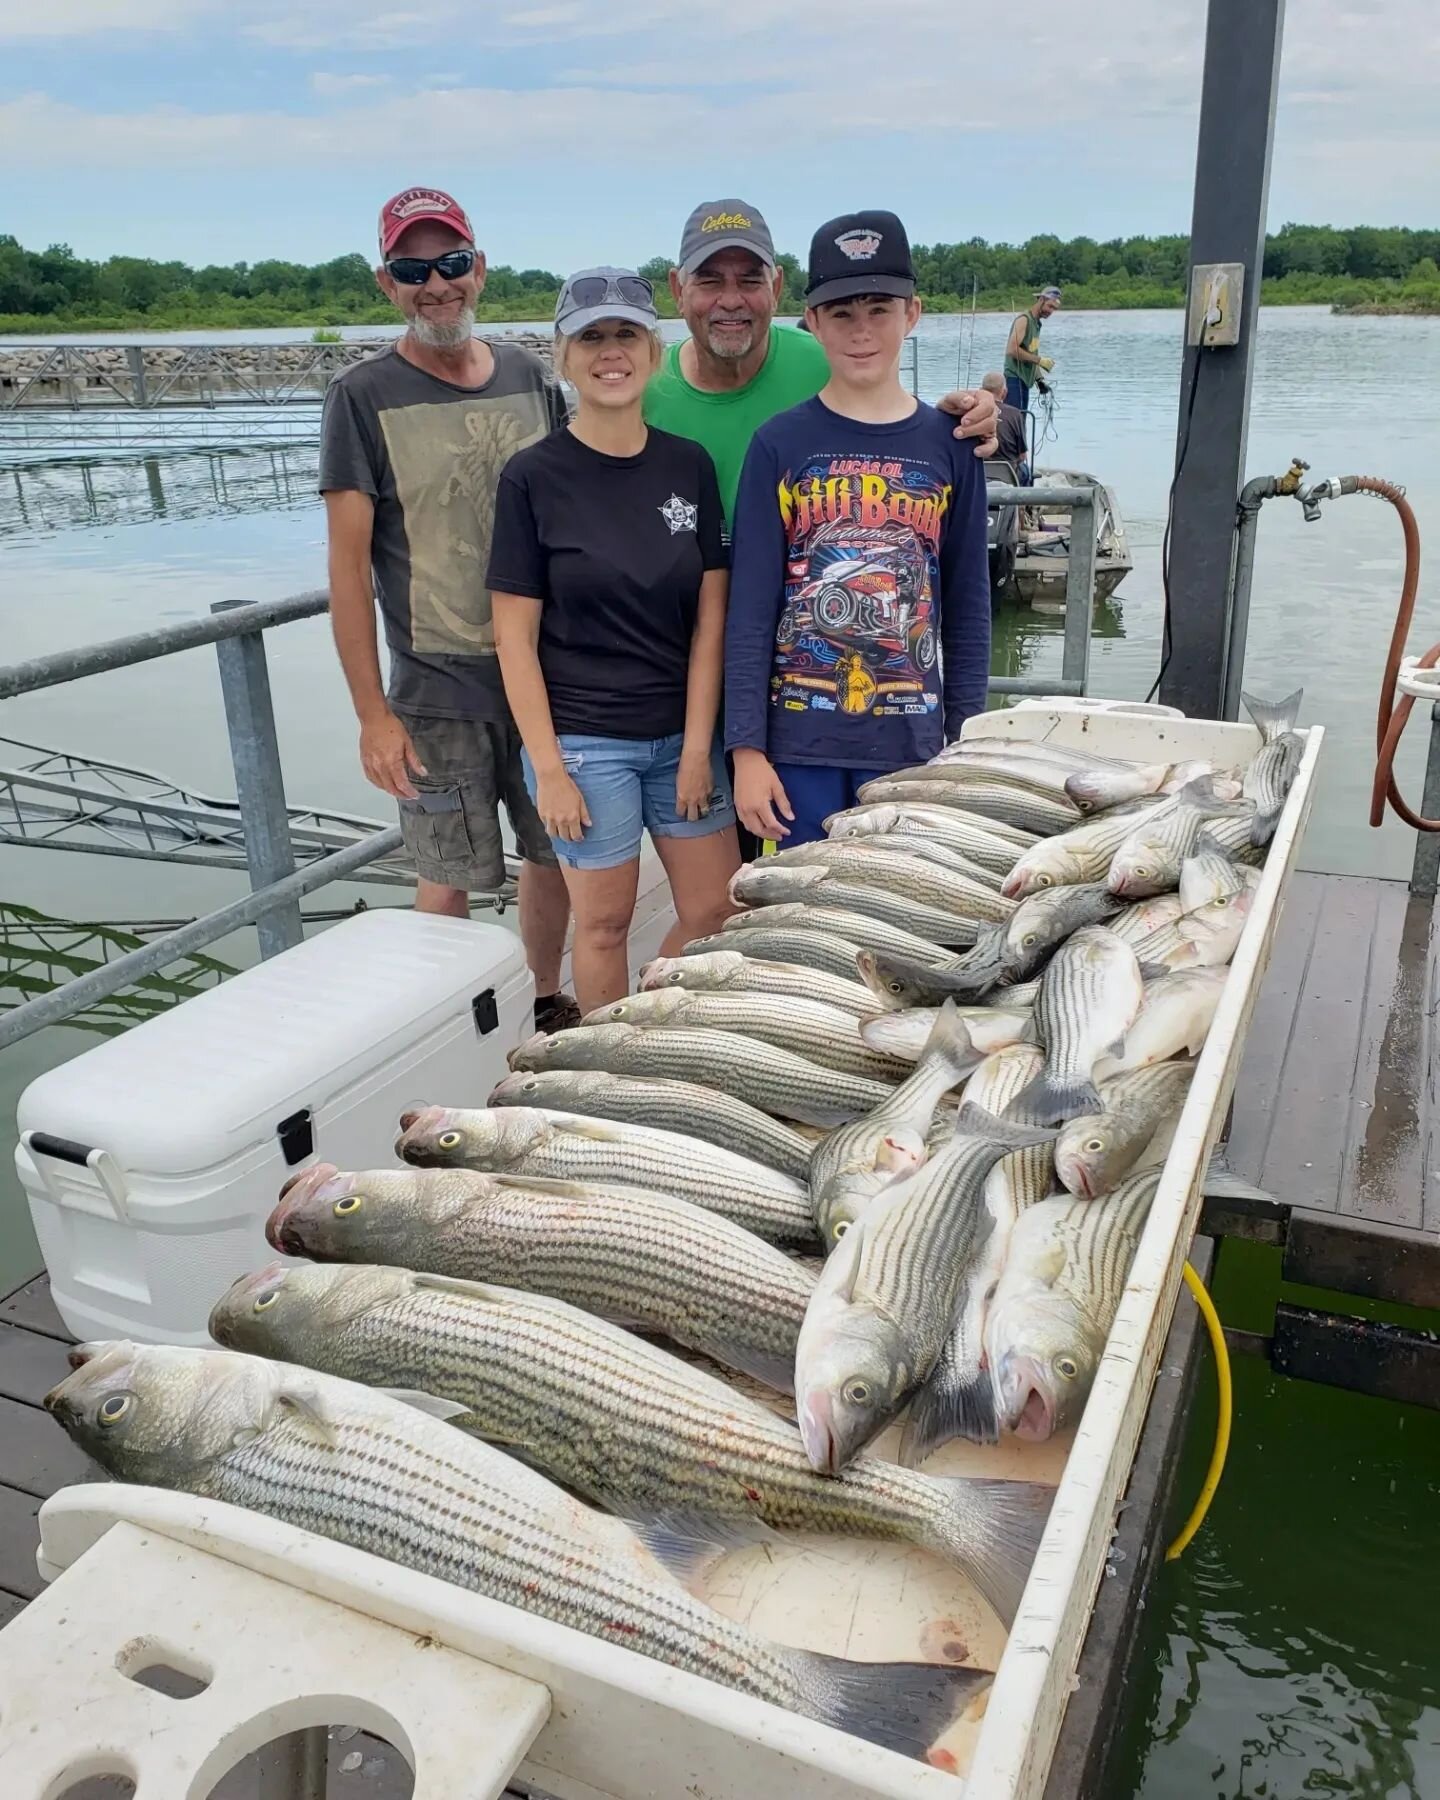 Those summer temps have definitely set in! It was a warm weekend here at Lake Texoma, but we still had some nice limits, big fish, and a really great time despite the heat. 

We've still got a few openings in June and July. Send us a message or text/